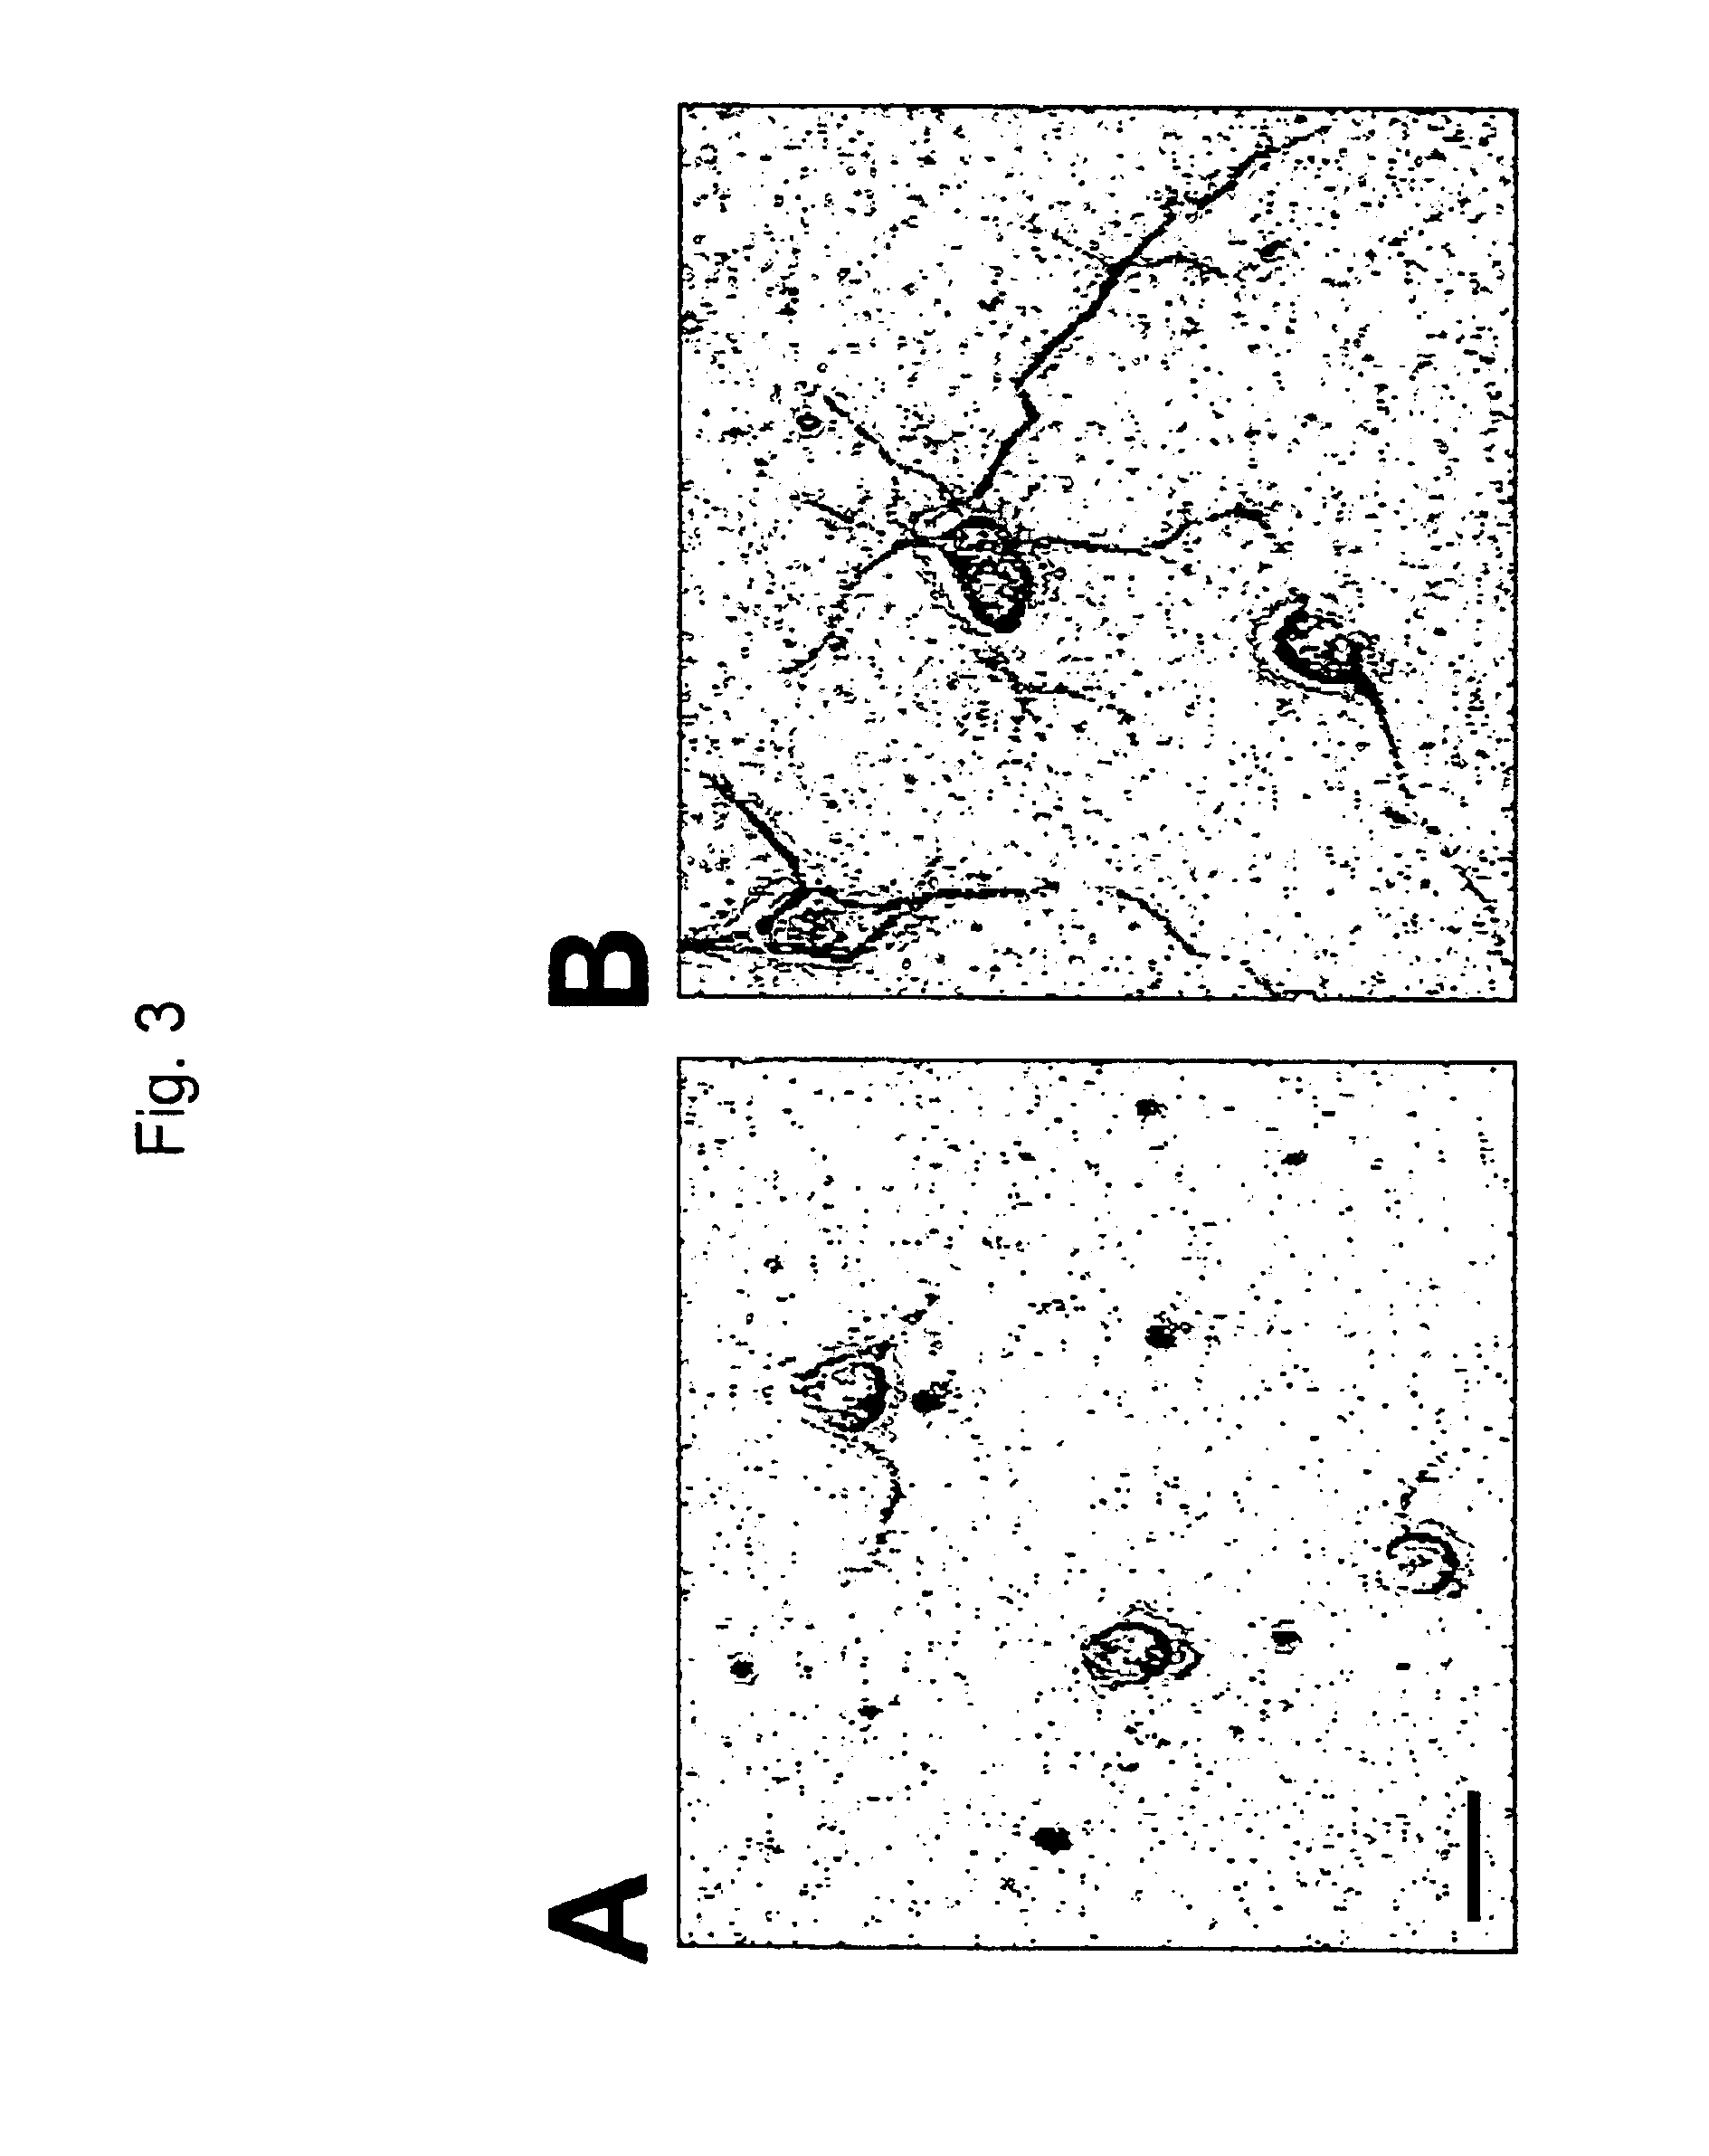 NCAM binding compounds